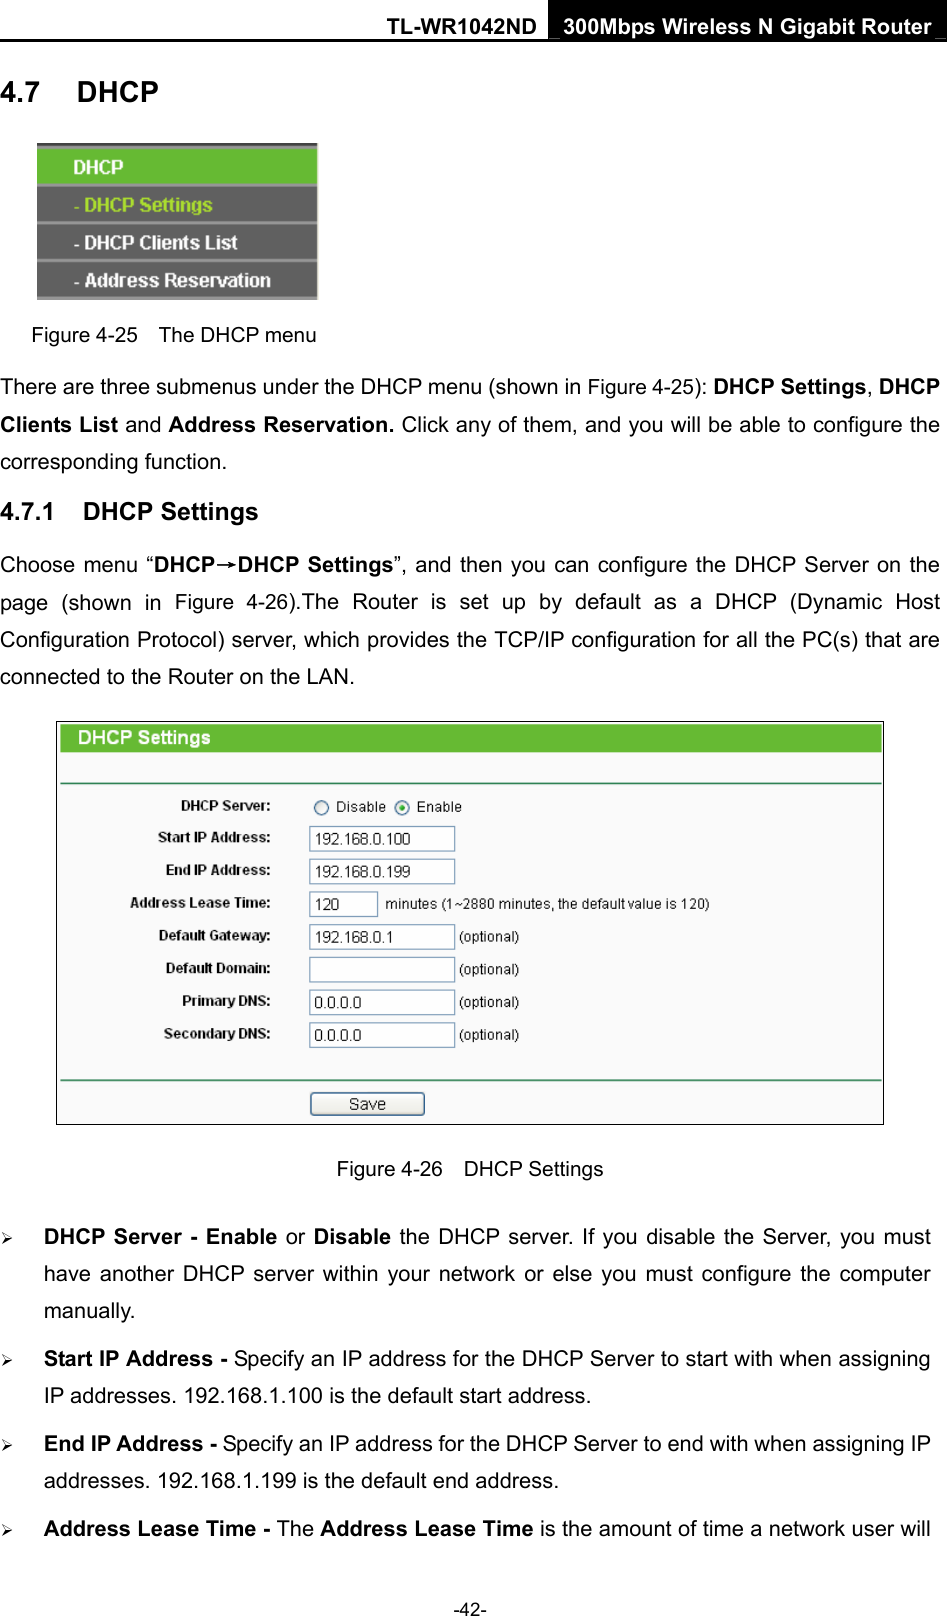 TL-WR1042ND 300Mbps Wireless N Gigabit Router -42- 4.7  DHCP  Figure 4-25    The DHCP menu There are three submenus under the DHCP menu (shown in Figure 4-25): DHCP Settings, DHCP Clients List and Address Reservation. Click any of them, and you will be able to configure the corresponding function. 4.7.1  DHCP Settings Choose menu “DHCP→DHCP Settings”, and then you can configure the DHCP Server on the page (shown in Figure 4-26).The Router is set up by default as a DHCP (Dynamic Host Configuration Protocol) server, which provides the TCP/IP configuration for all the PC(s) that are connected to the Router on the LAN.    Figure 4-26  DHCP Settings ¾ DHCP Server - Enable or Disable the DHCP server. If you disable the Server, you must have another DHCP server within your network or else you must configure the computer manually. ¾ Start IP Address - Specify an IP address for the DHCP Server to start with when assigning IP addresses. 192.168.1.100 is the default start address. ¾ End IP Address - Specify an IP address for the DHCP Server to end with when assigning IP addresses. 192.168.1.199 is the default end address. ¾ Address Lease Time - The Address Lease Time is the amount of time a network user will 